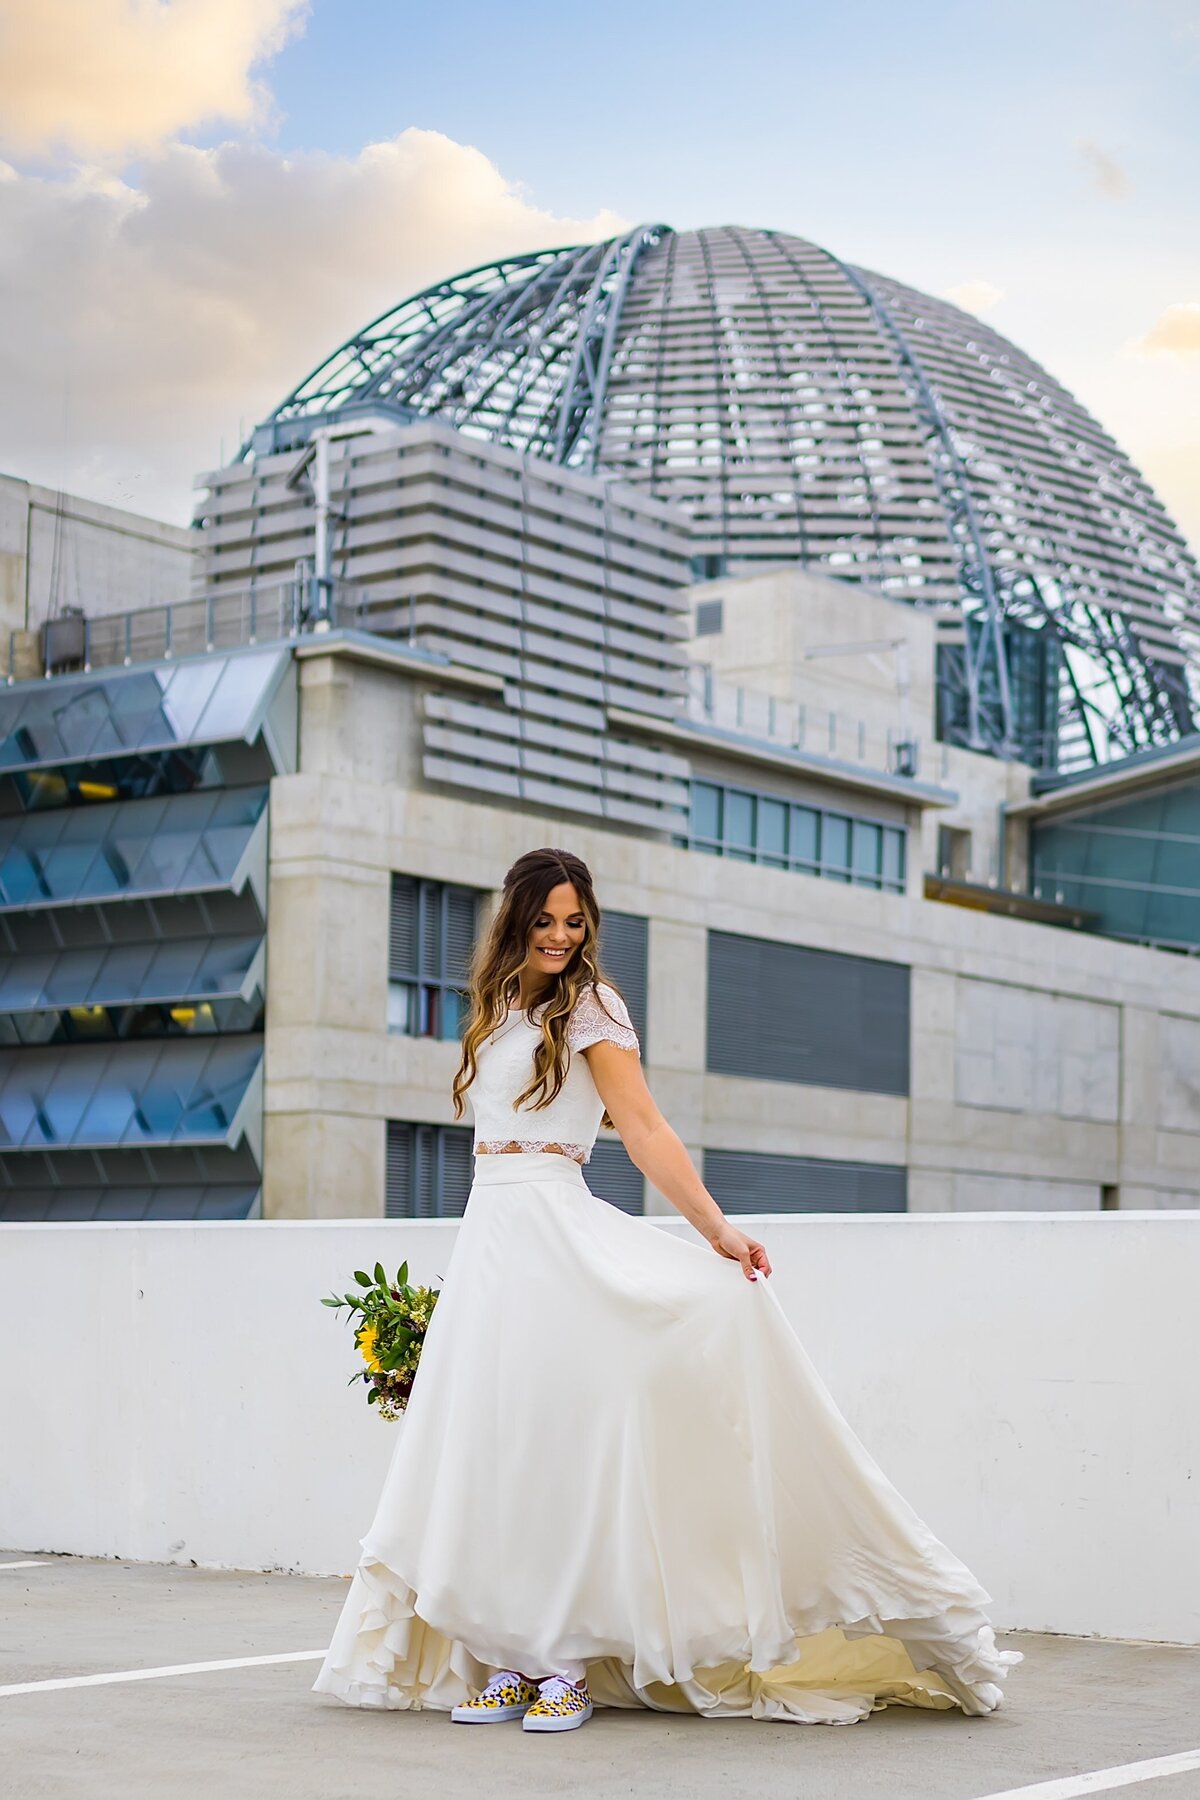 Bridal portrait on rooftop in San Diego, CA